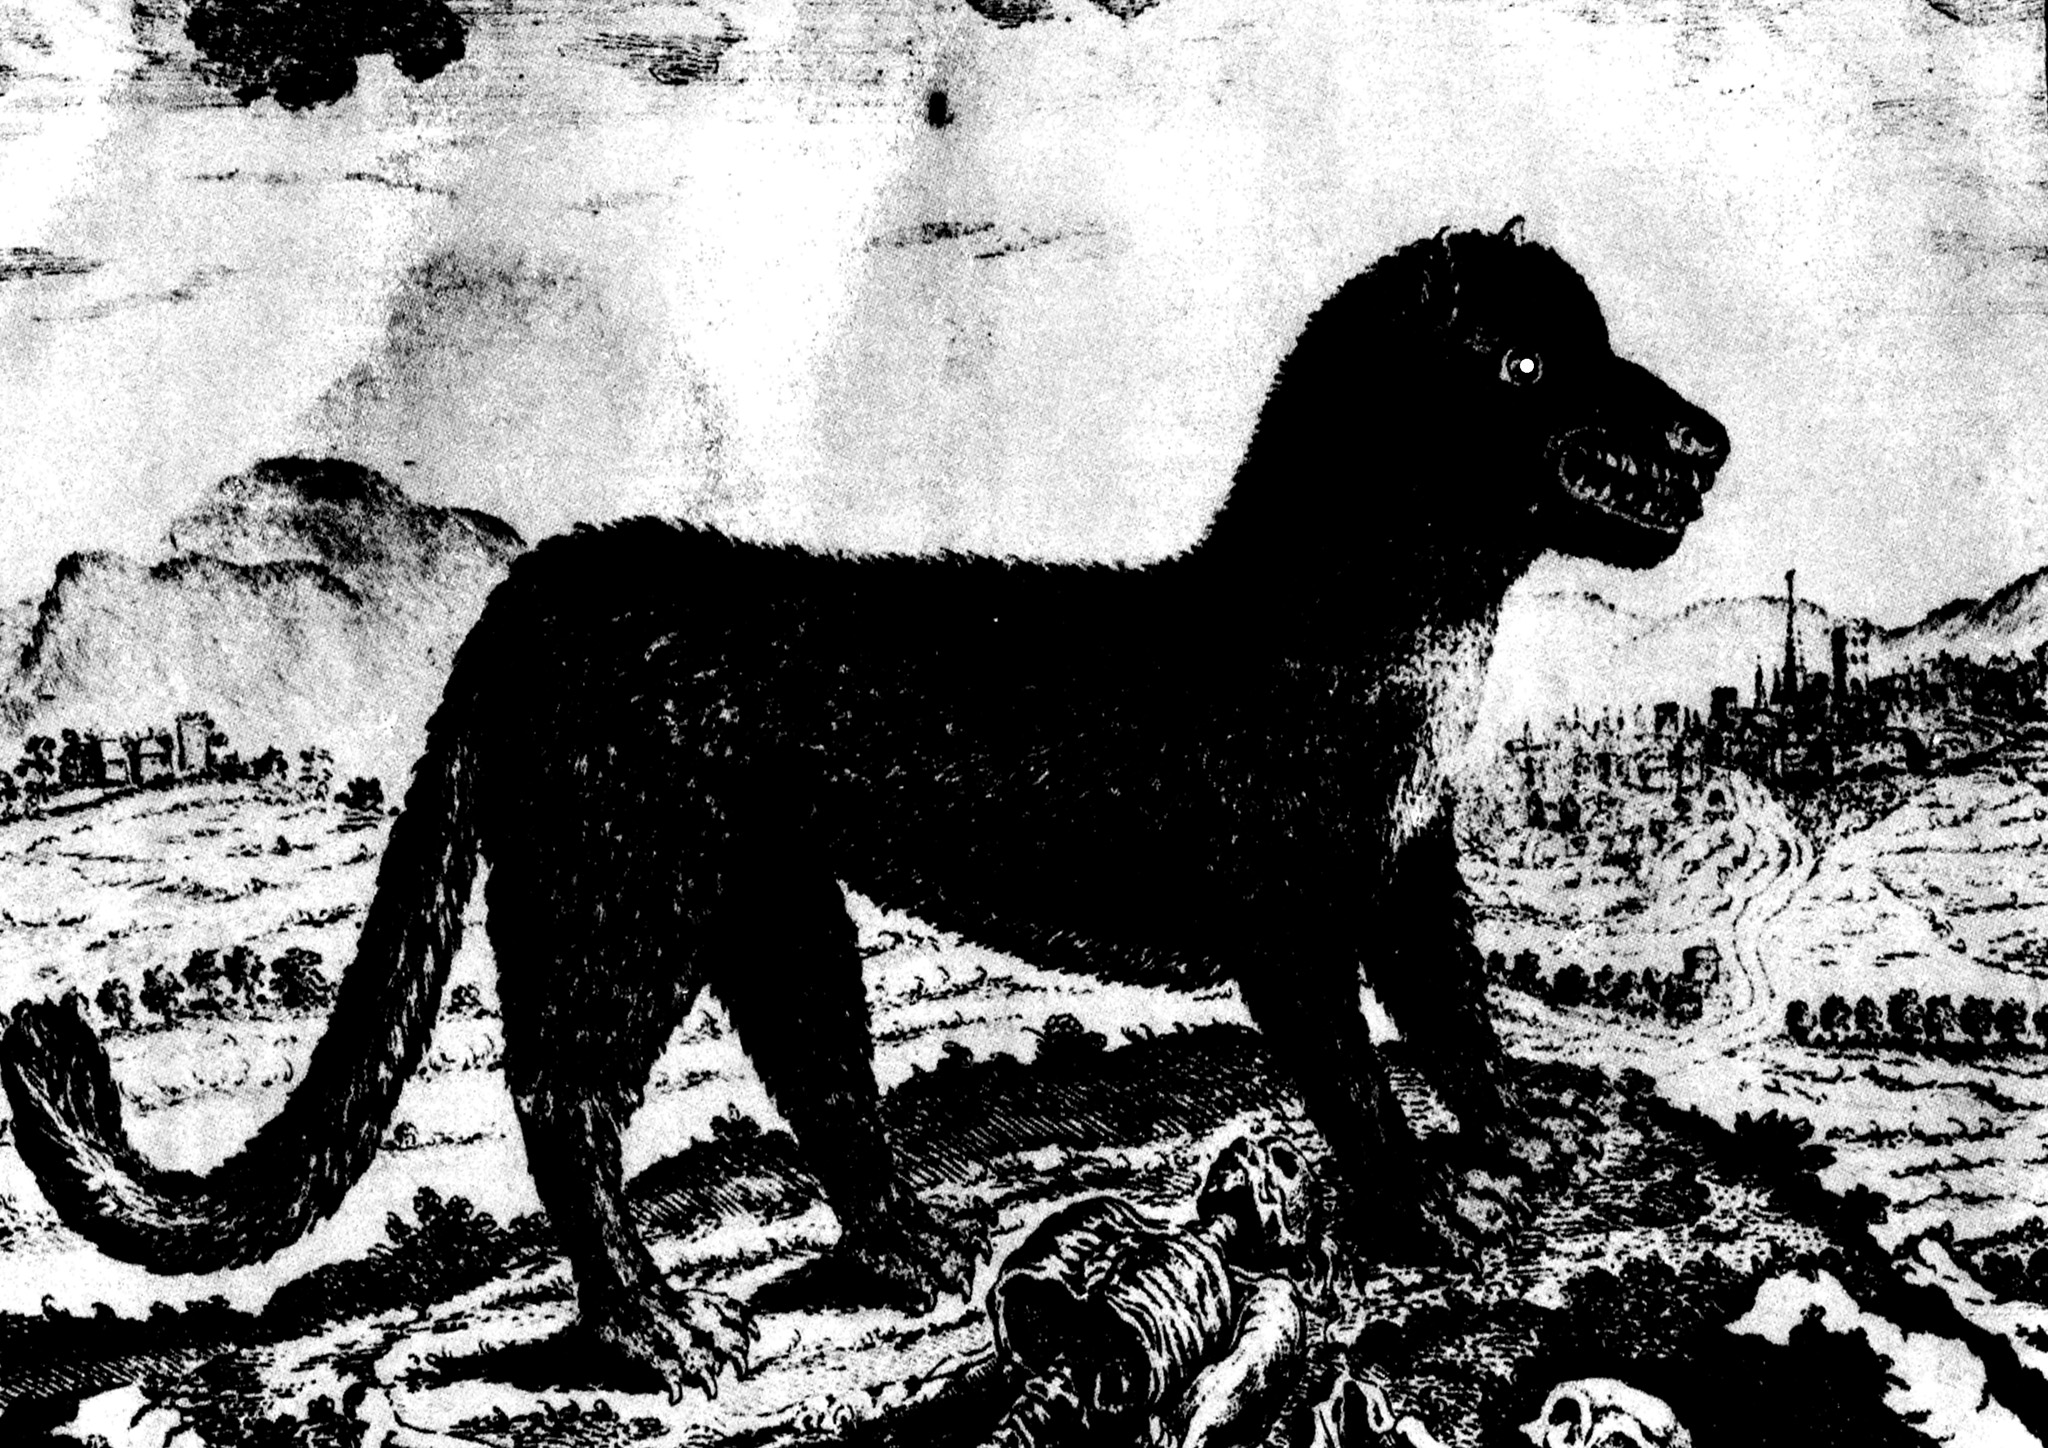 A black and white depiction of the Beast of Gévaudan.